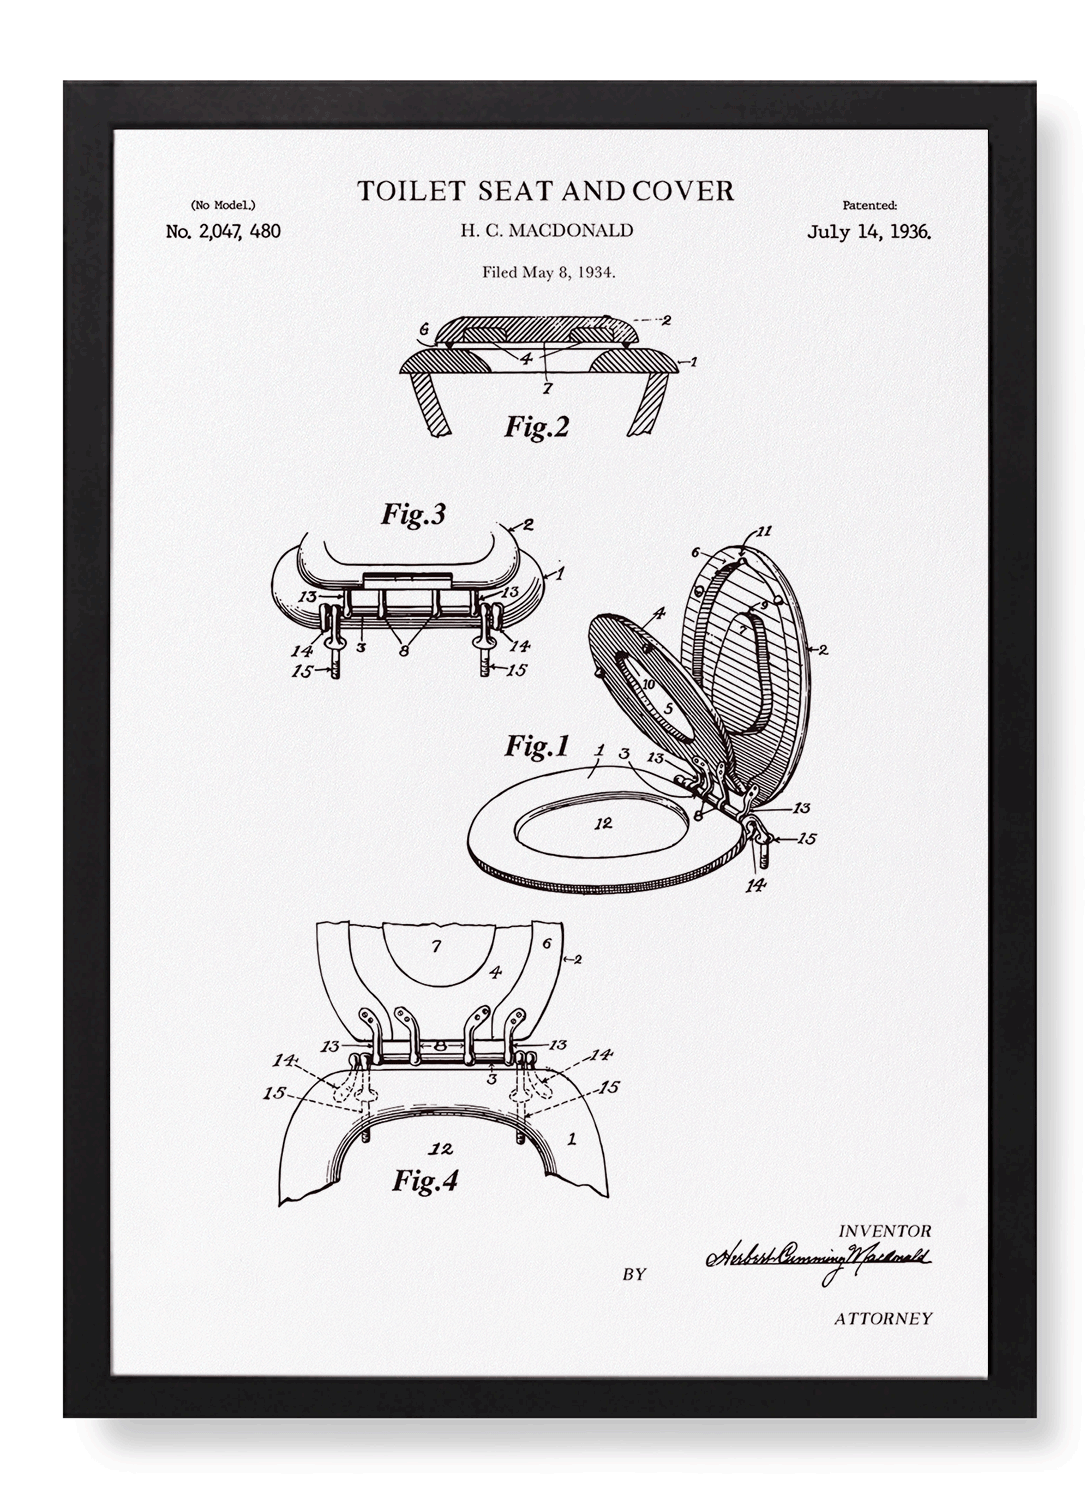 PATENT OF TOILET SEAT AND COVER (1936)